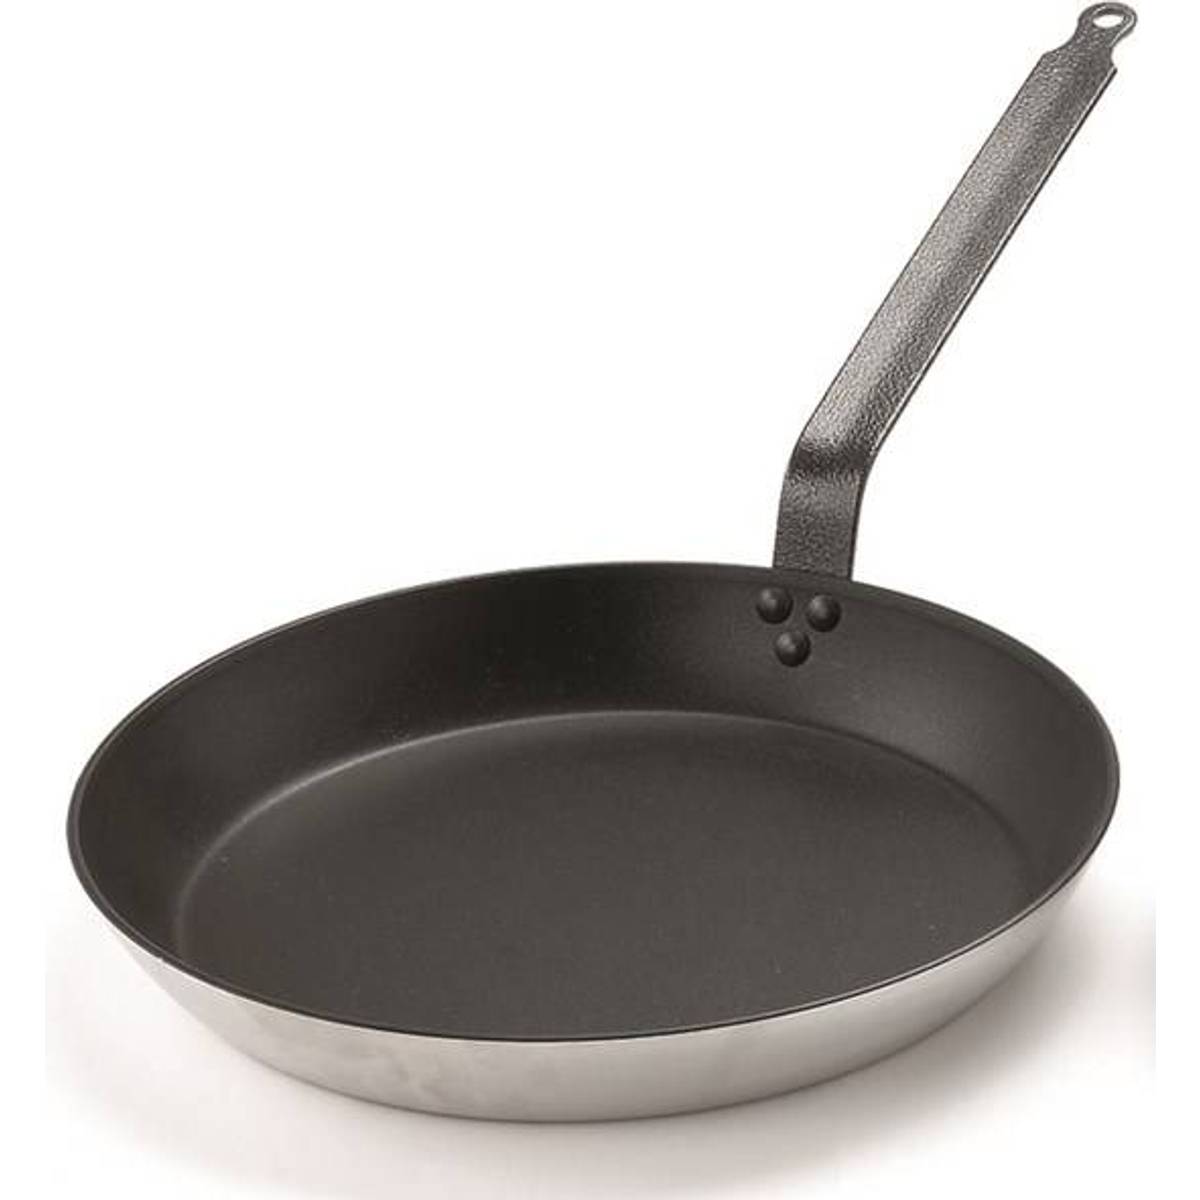 Compare best Bourgeat Cookware prices on the market - PriceRunner